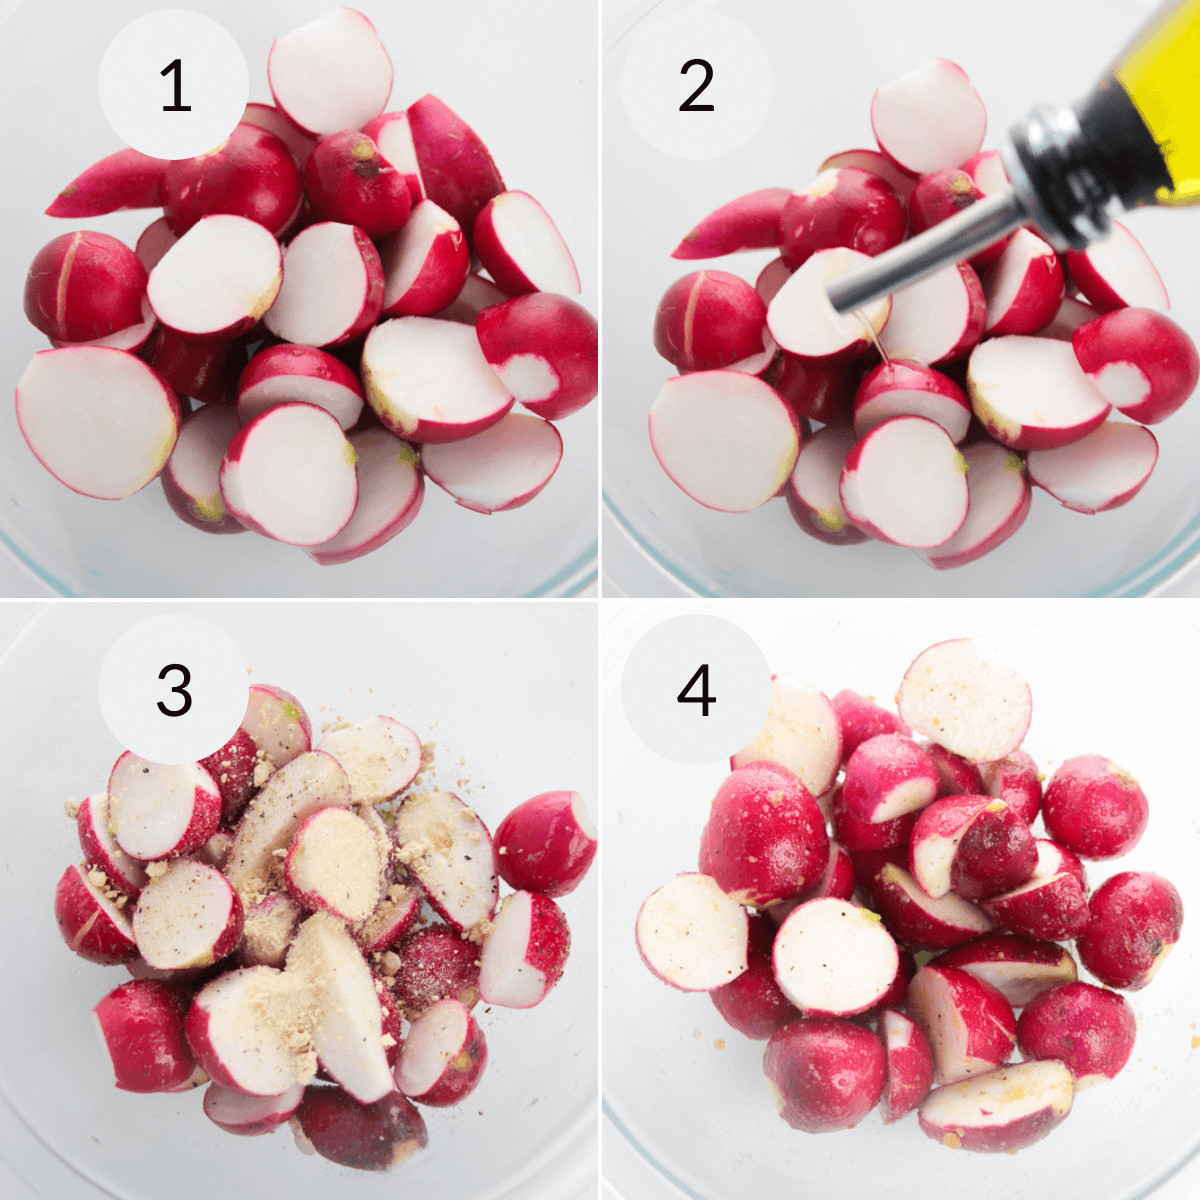 Cutting and preparing the radishes for the air fryer.